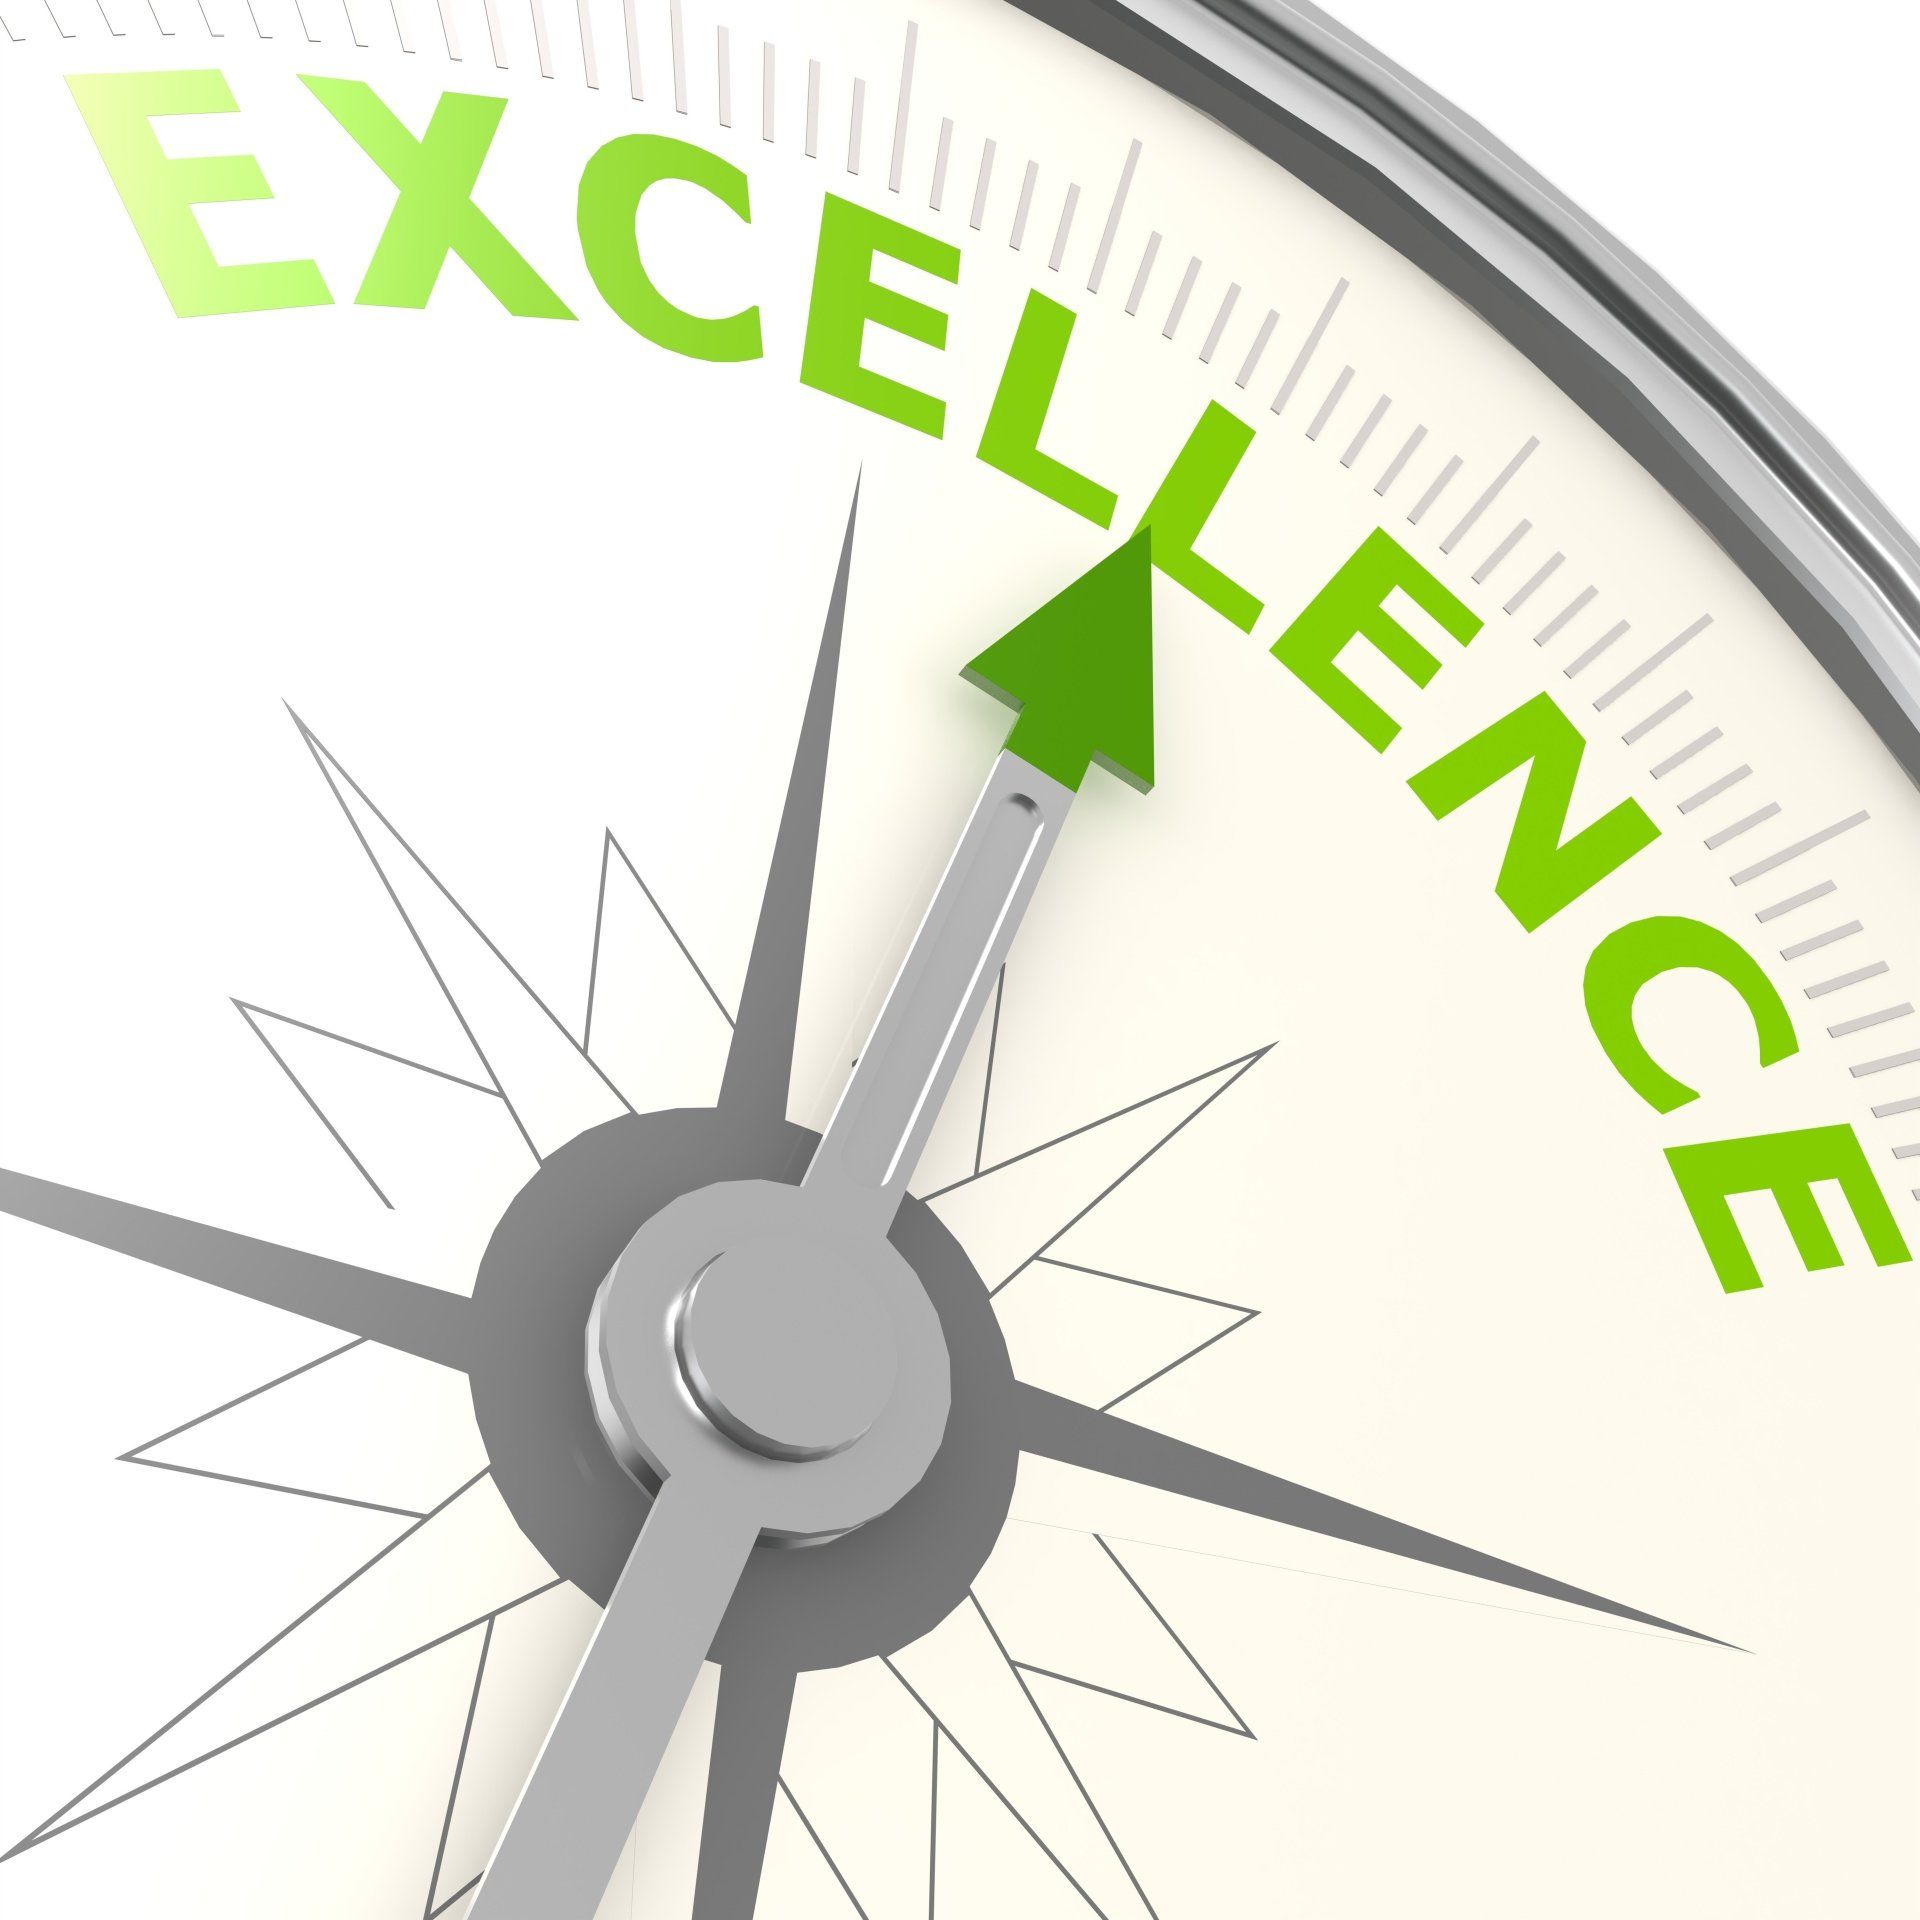 A path towards sales excellence